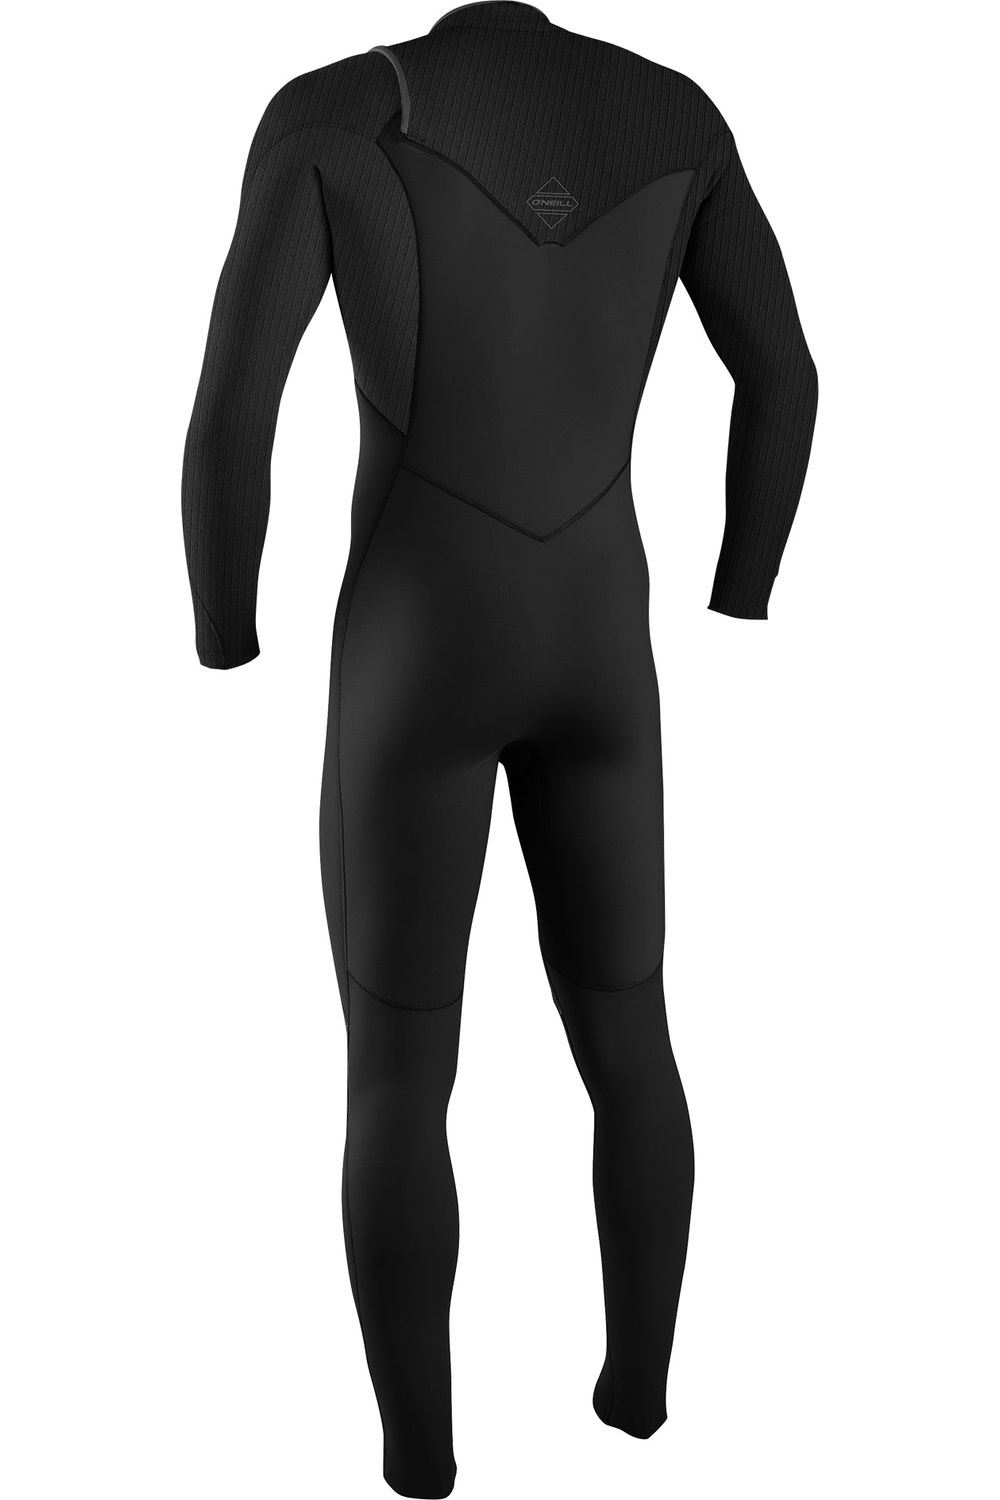 O'neill Hyperfreak Mens Wetsuit 4/3+ from the back